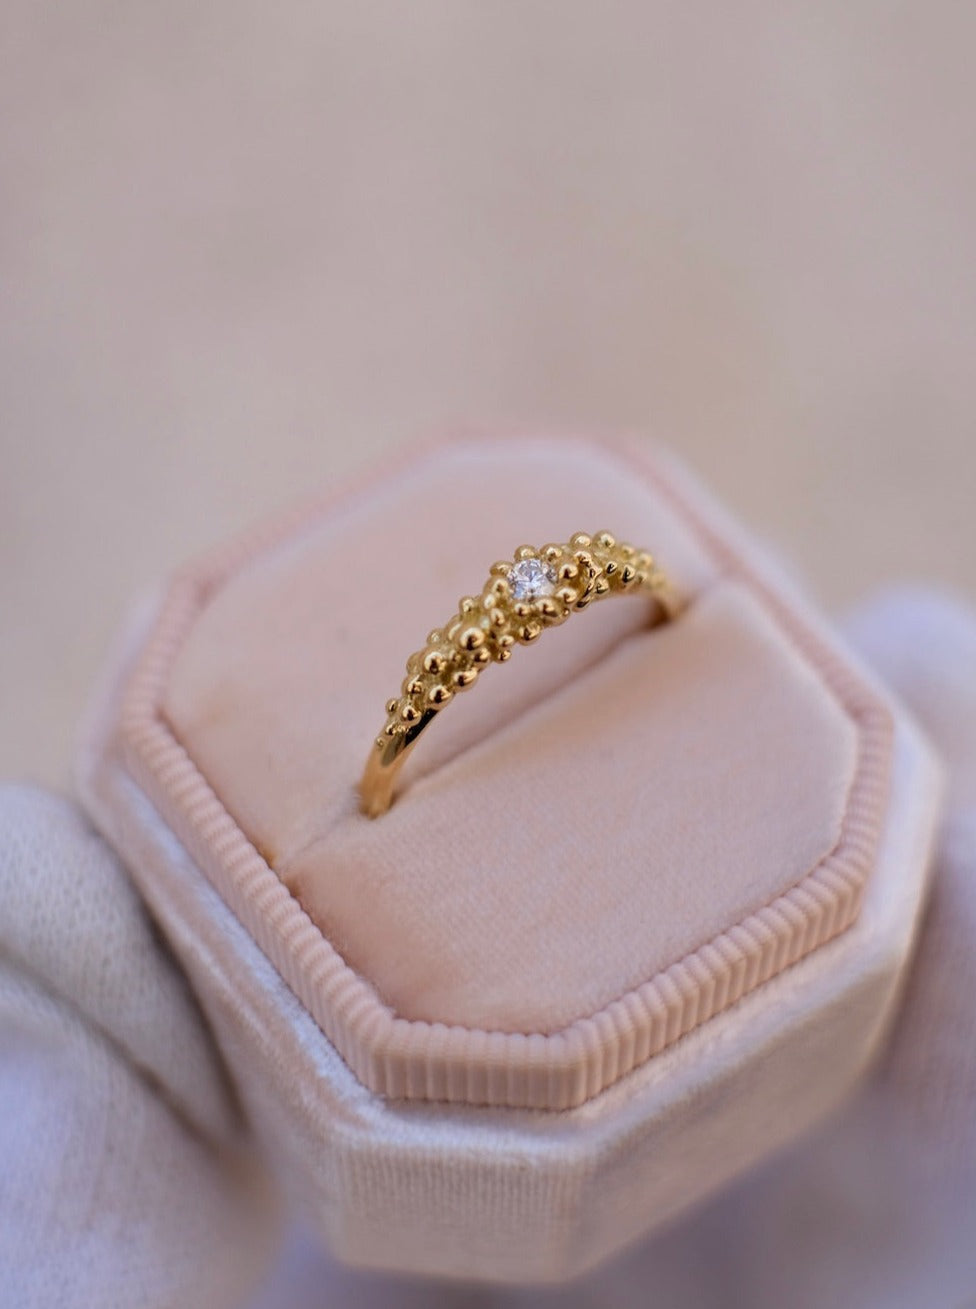 An 18K GOLD Dots Diamond Ring by Cremilde Bispo Jewellery, featuring a diamond set in a gold band.